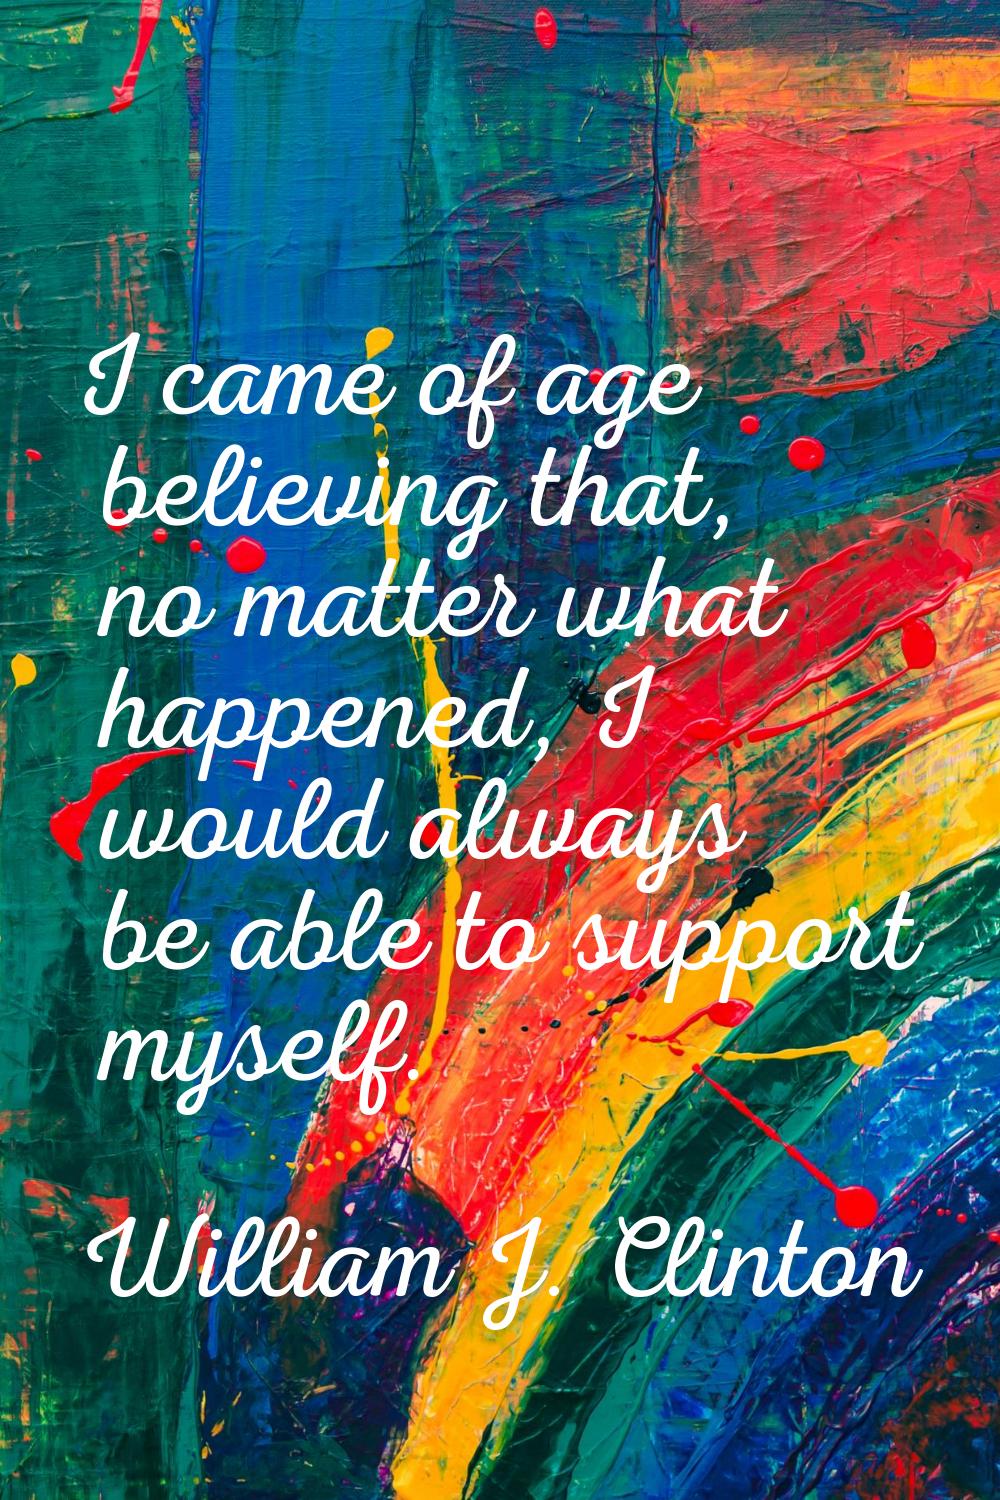 I came of age believing that, no matter what happened, I would always be able to support myself.